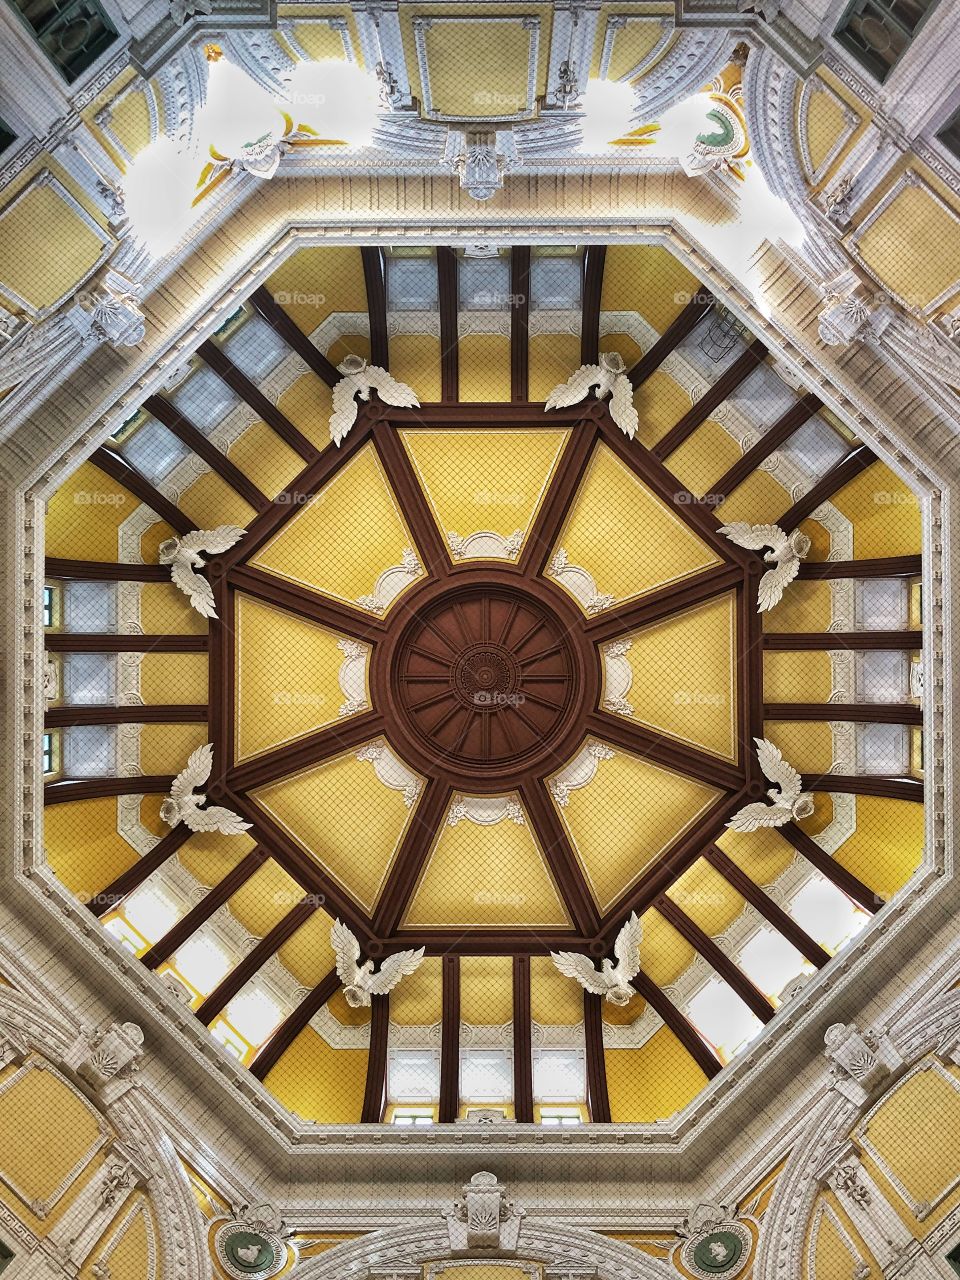 The ceiling in old-architecture style of Tokyo station